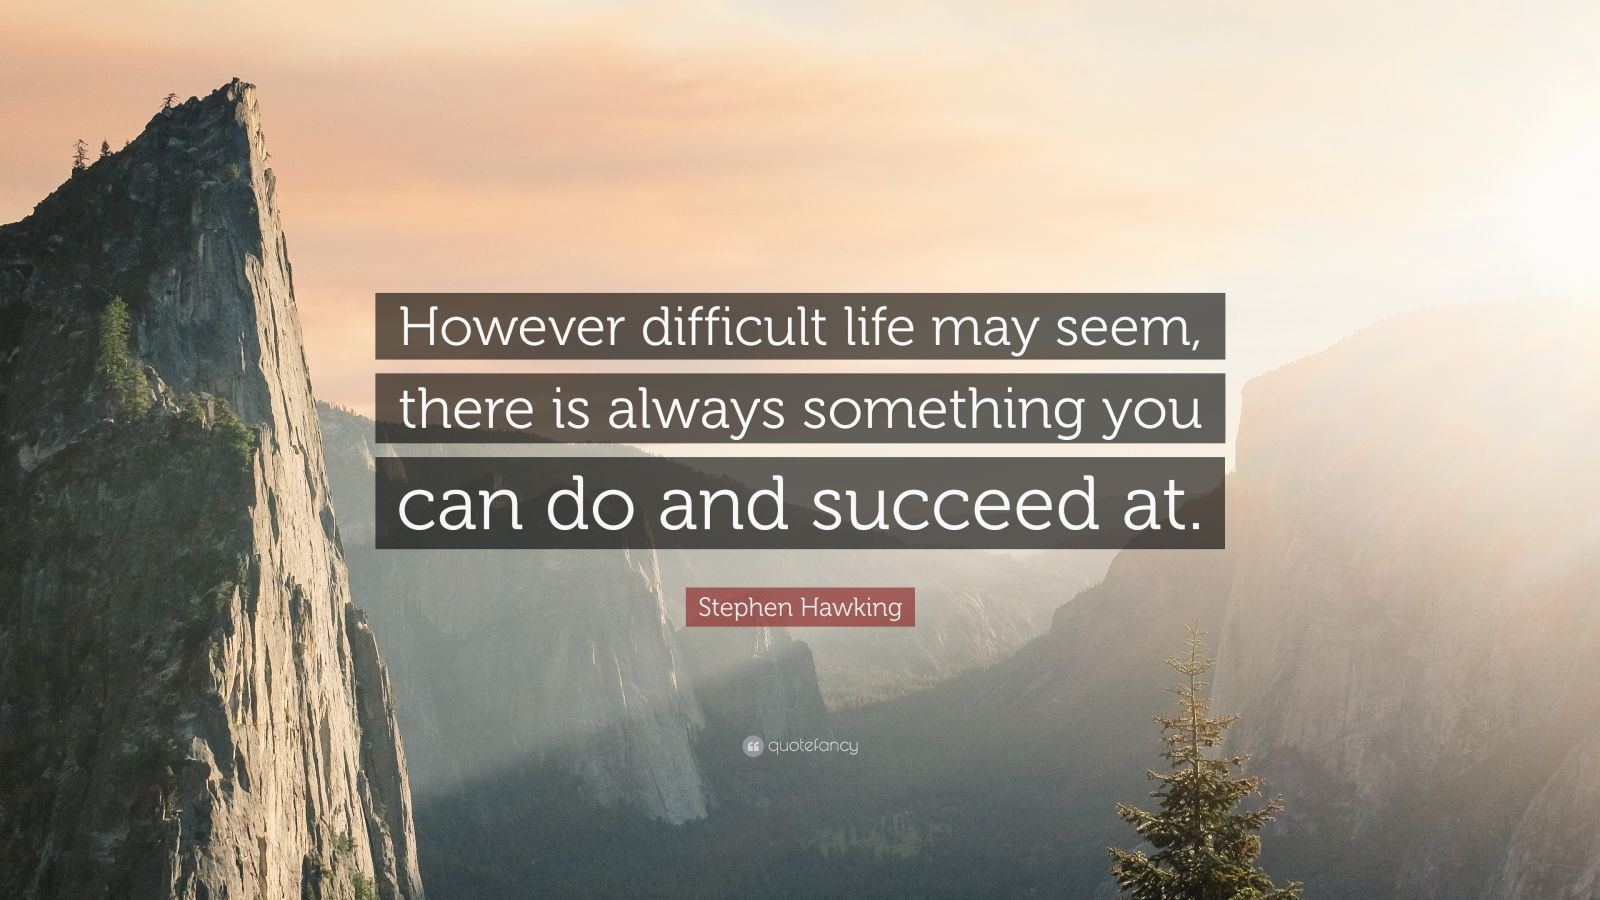 Stephen Hawking Quote “However difficult life may seem